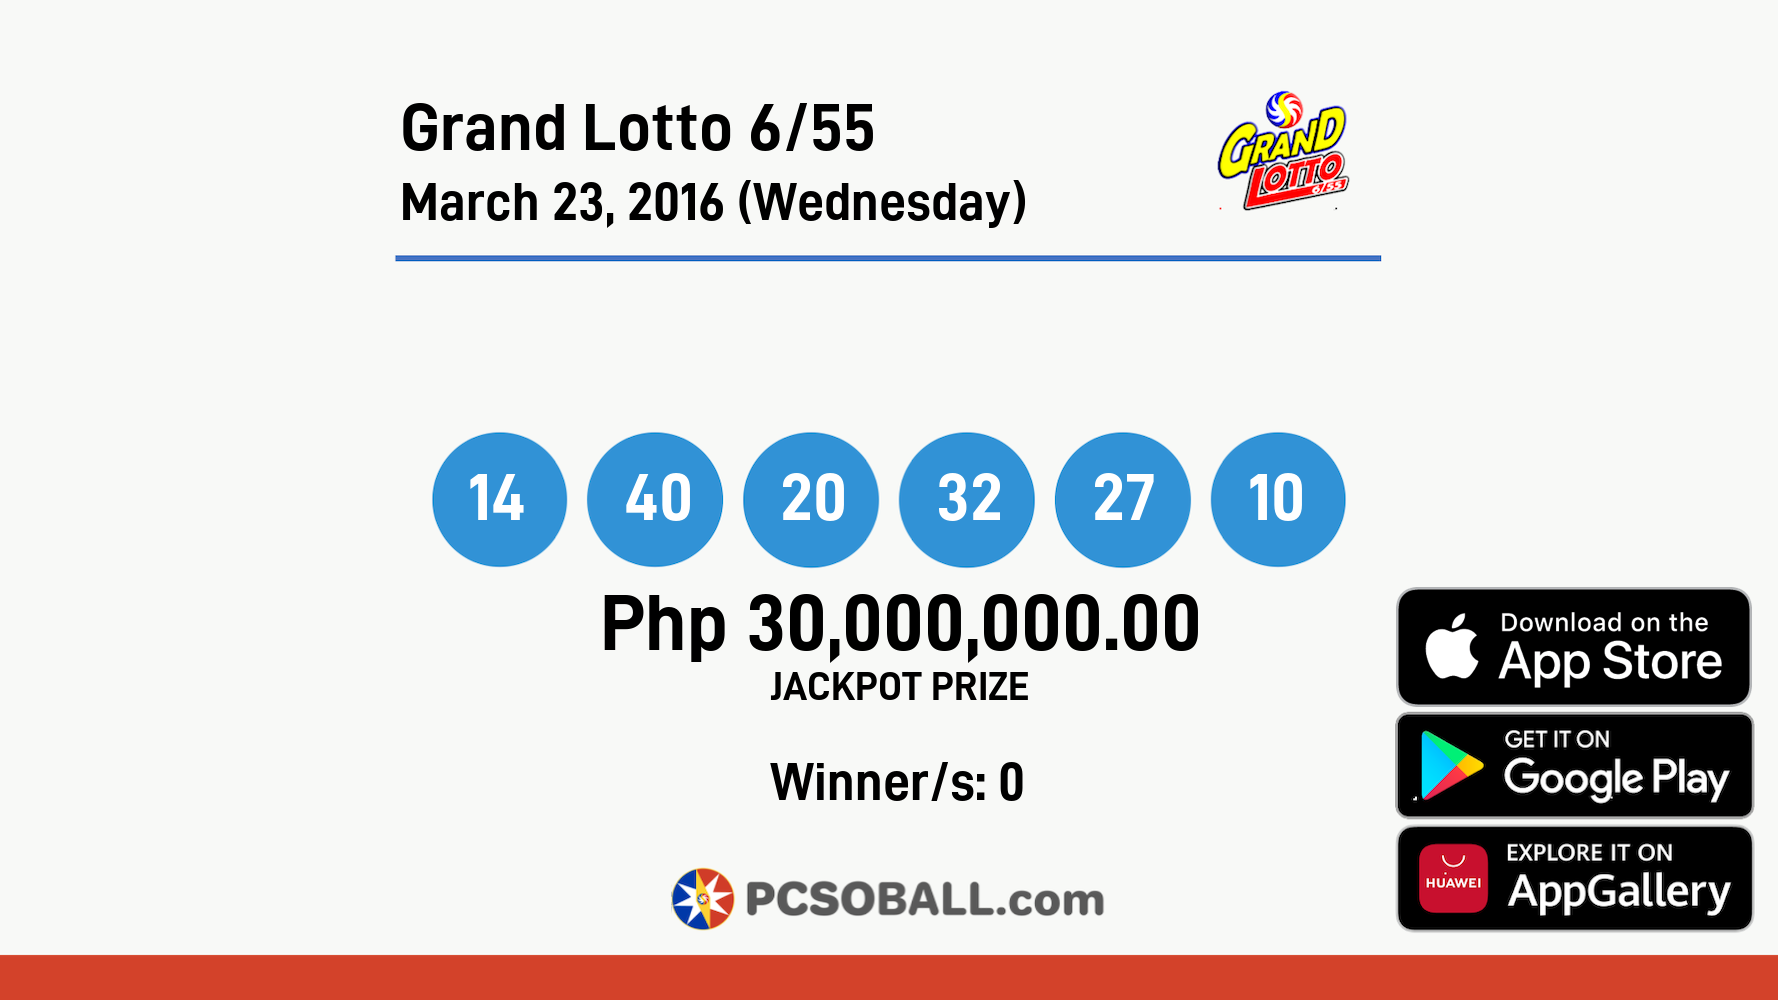 Grand Lotto 6/55 March 23, 2016 (Wednesday) Result